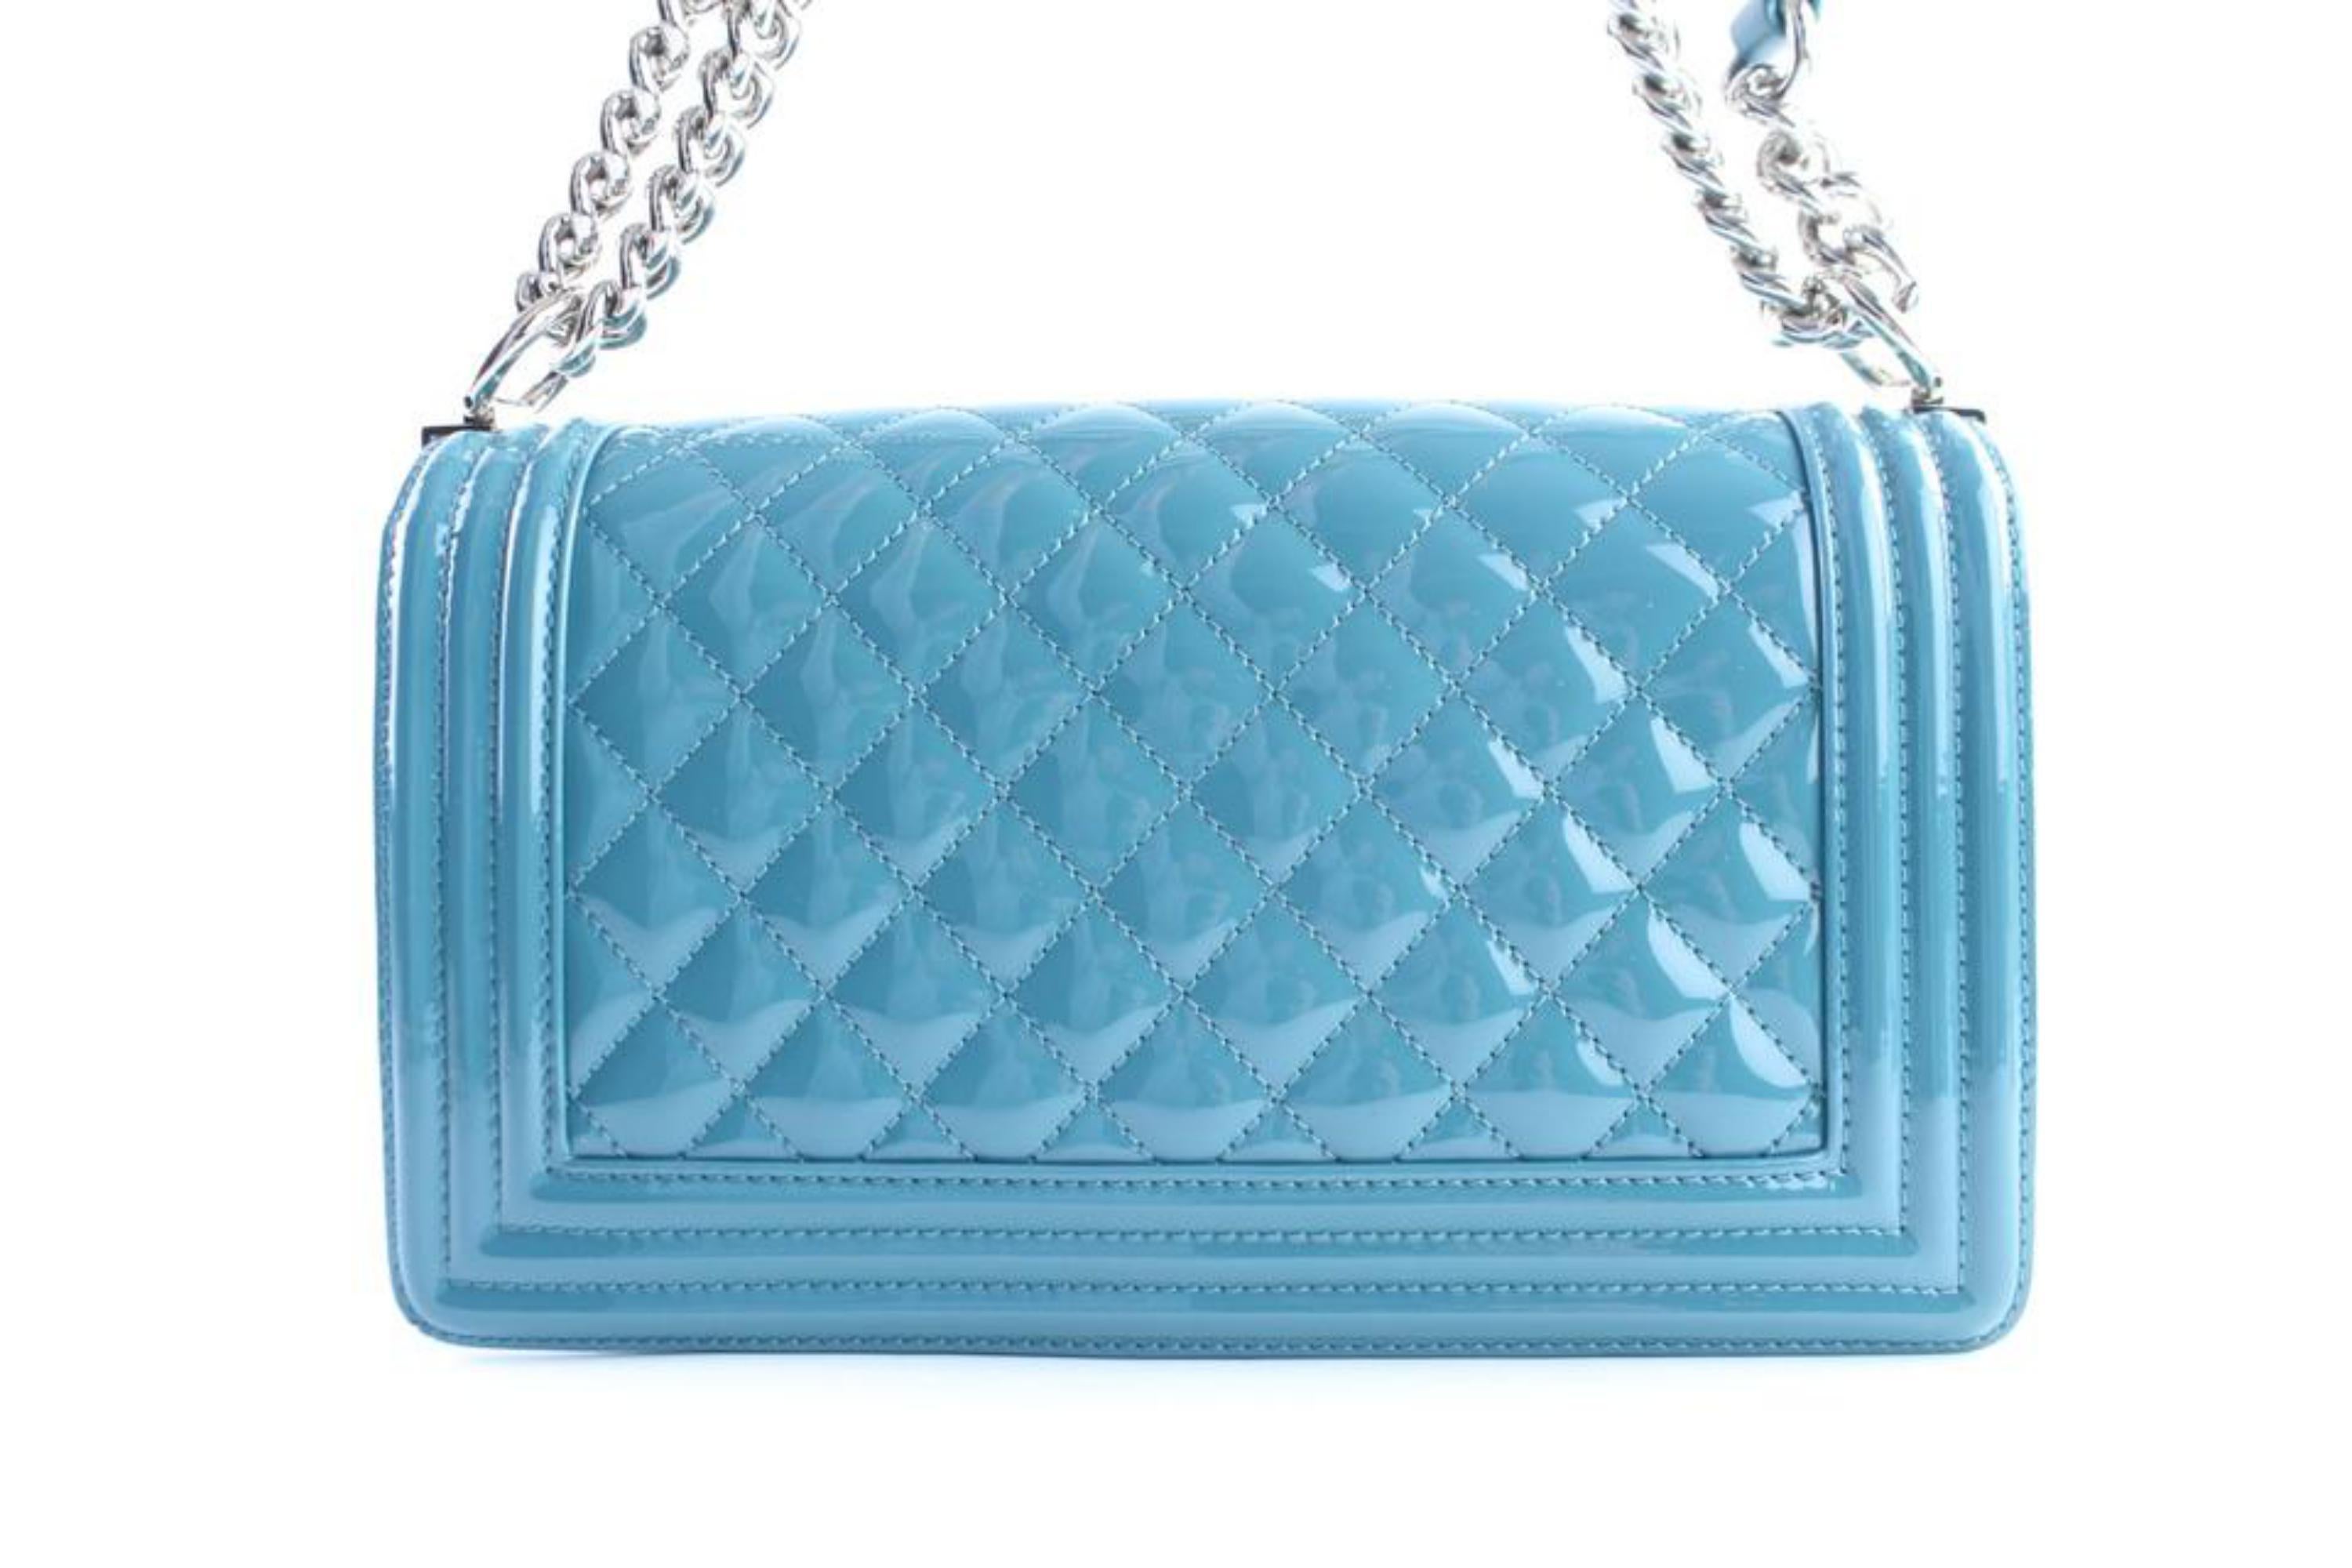 Chanel Boy Plexiglass 1cr0604 Aqua Blue Quilted Patent Leather Cross Body Bag In Excellent Condition For Sale In Forest Hills, NY